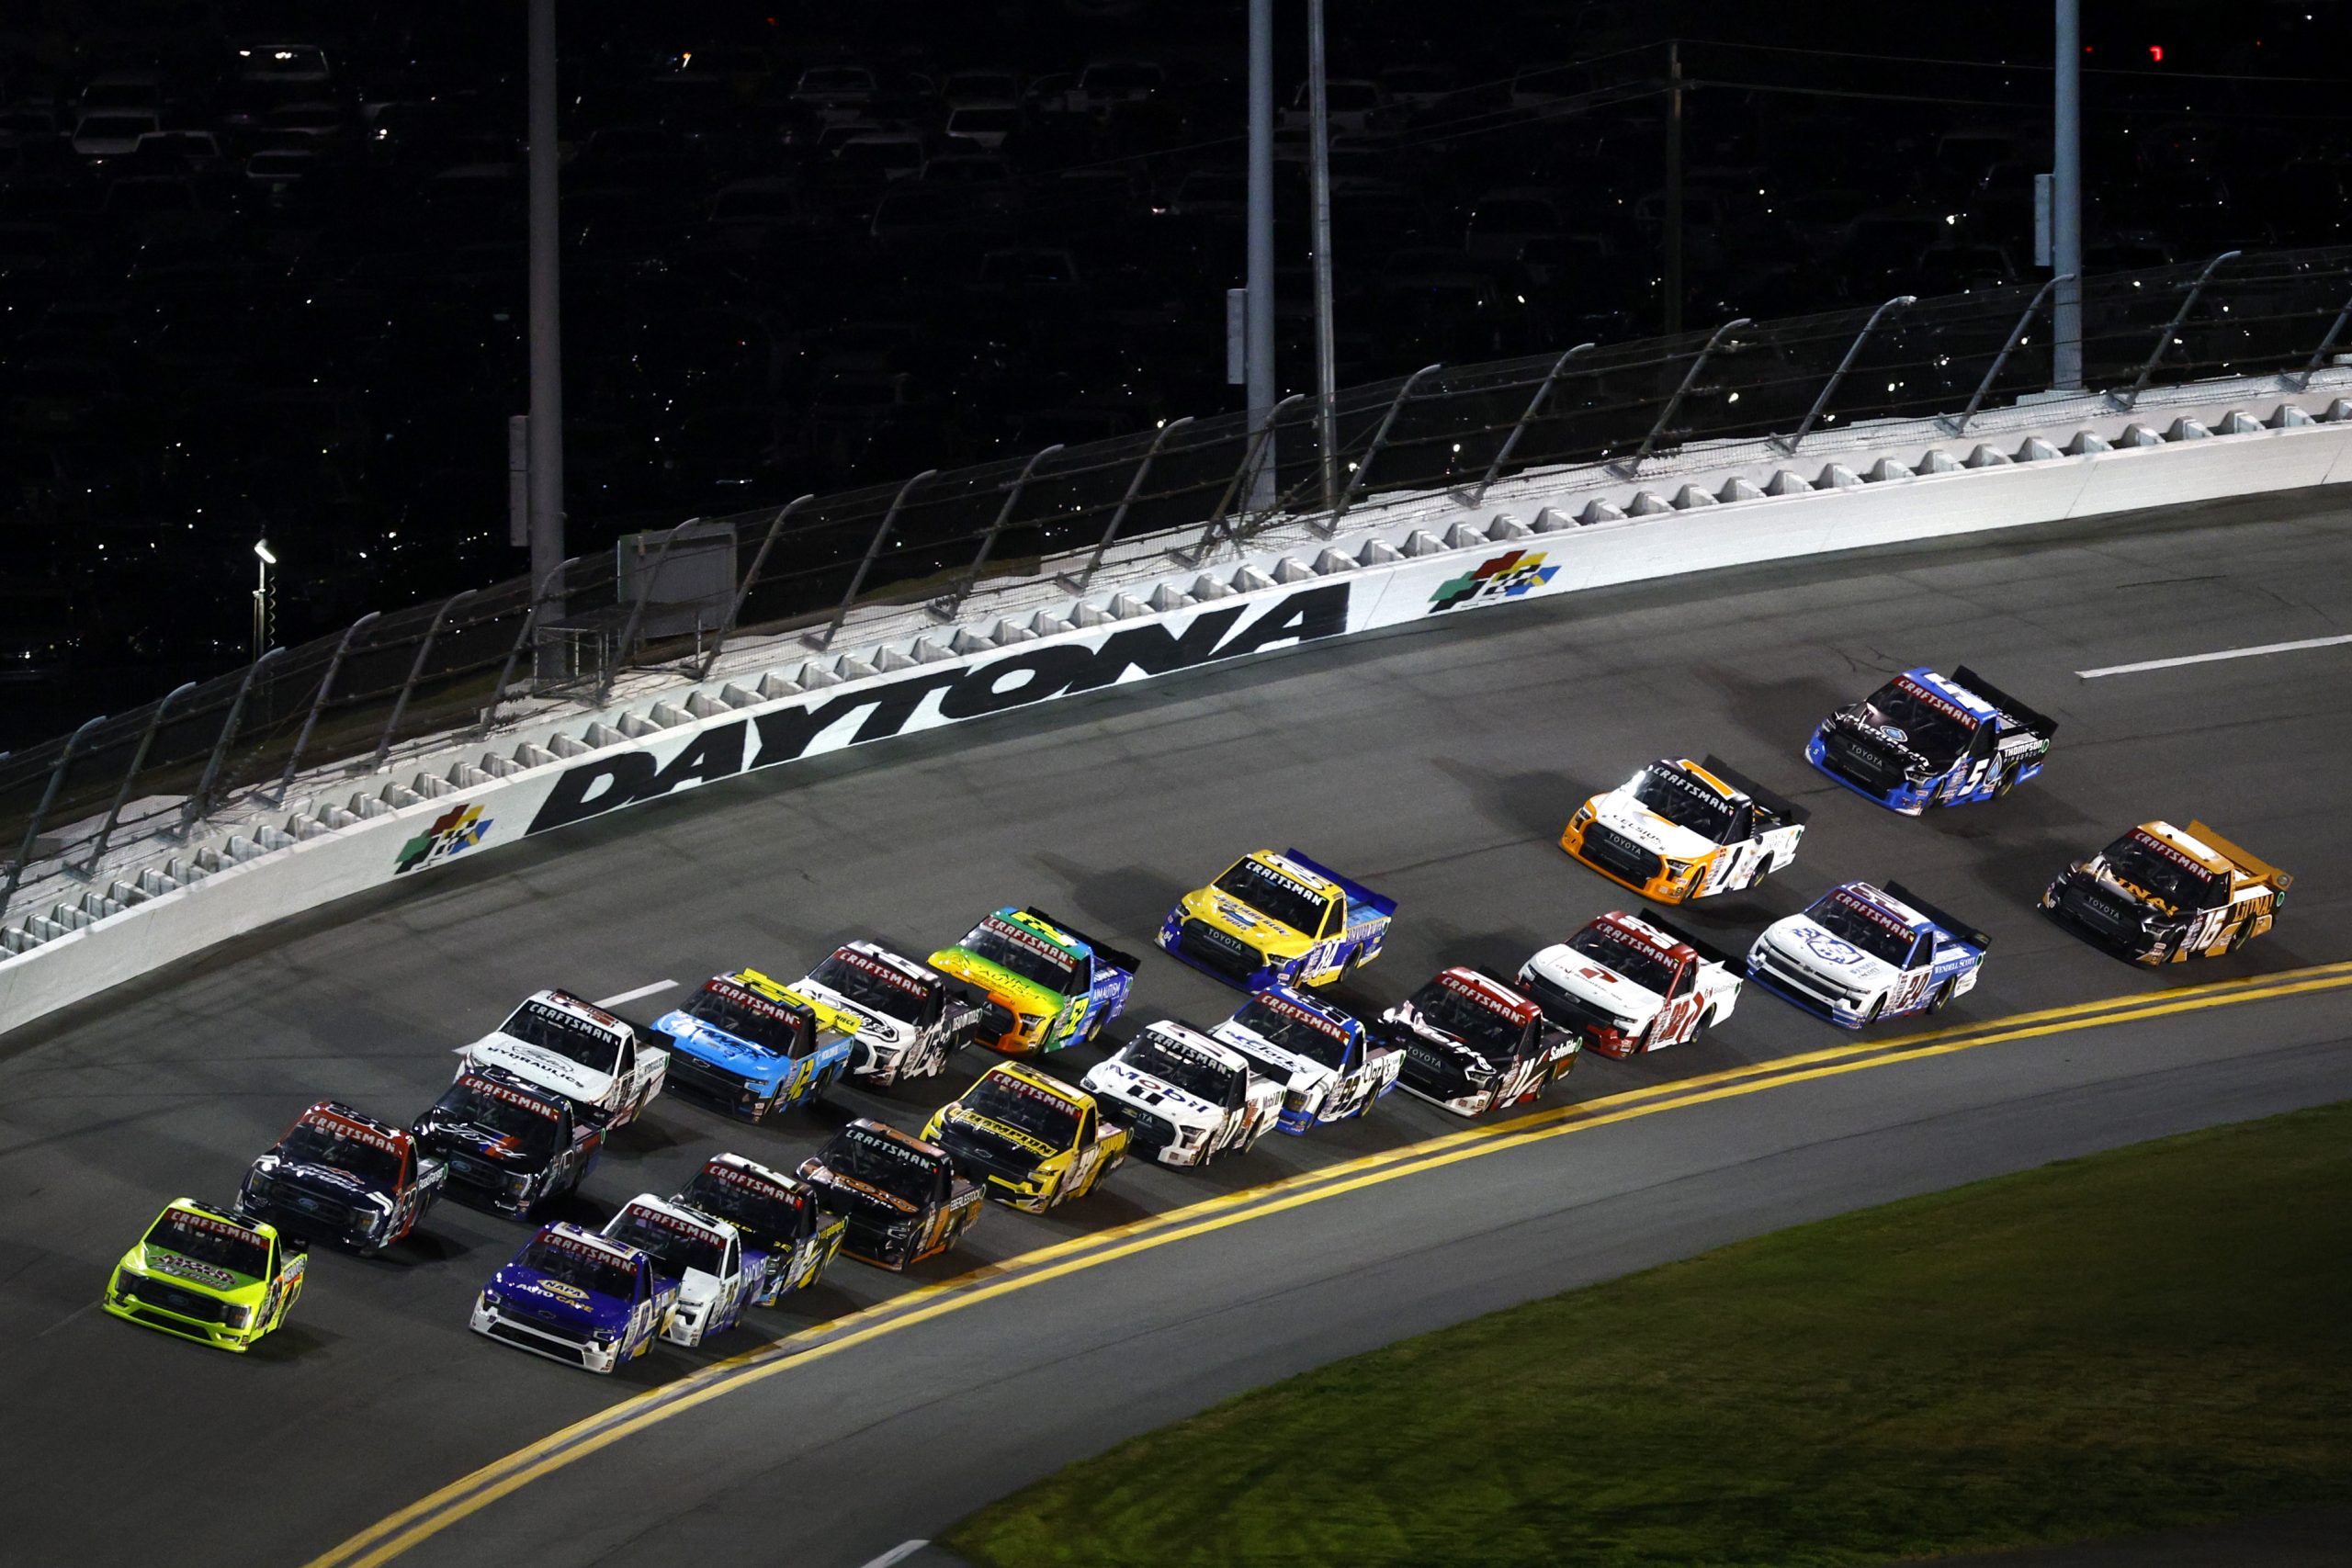 Christian Eckes, driver of the #19 NAPA AutoCare Chevrolet, and Matt Crafton, driver of the #88 Mold-Armor/Menards Ford, lead the field during the NASCAR Craftsman Truck Series NextEra Energy 250 at Daytona International Speedway on February 17, 2023 in Daytona Beach, Florida.